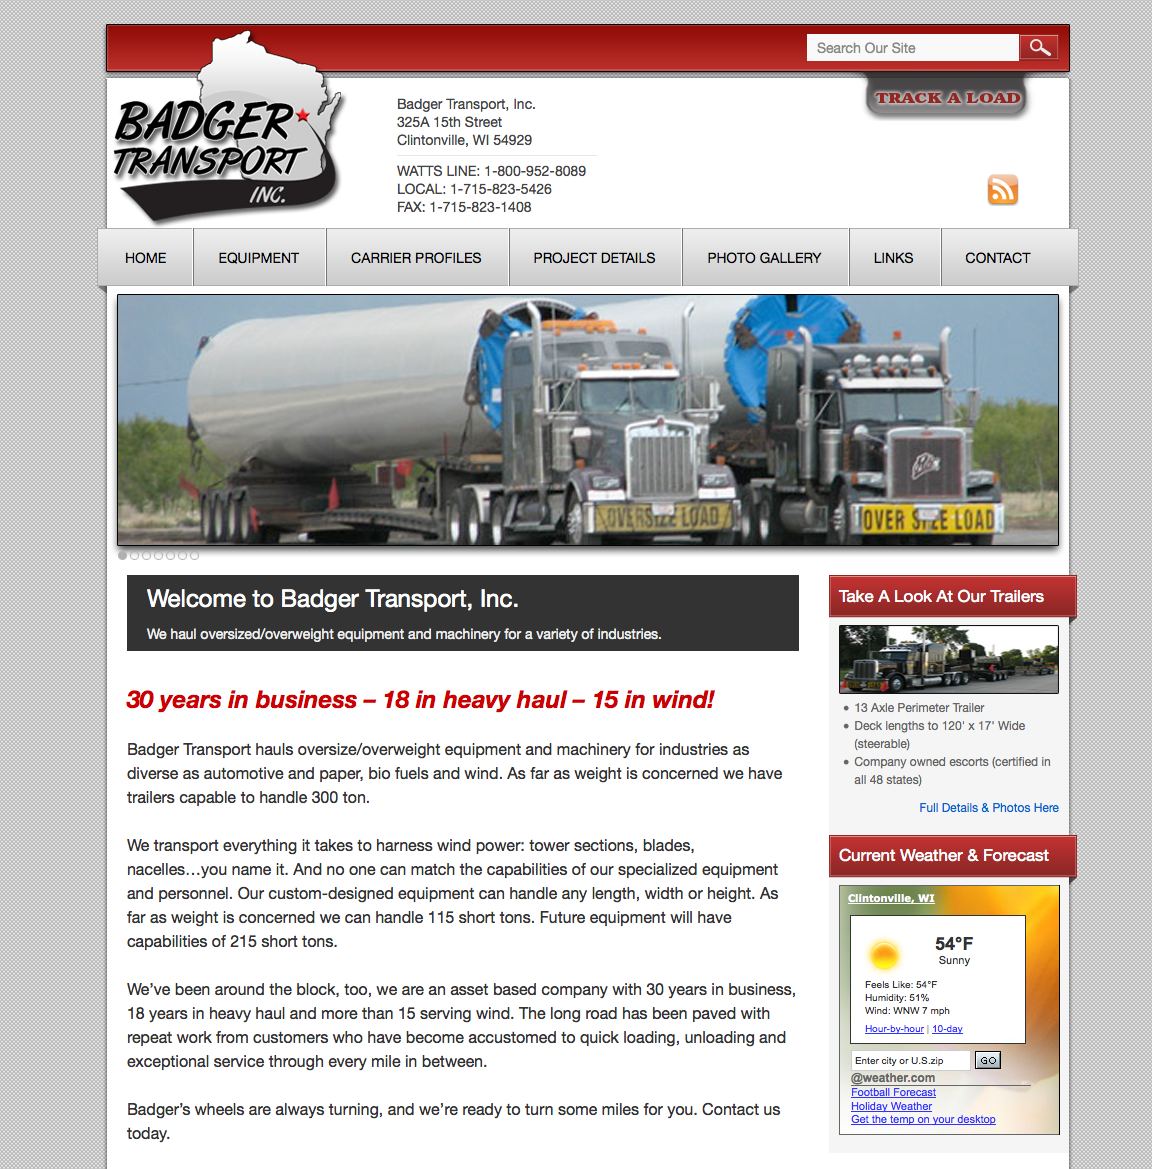 Badger Transport, hauling oversized loads, hauling overweight equipment and machinery, automotive hauling, bio fuel hauling, and transportation of wind components.members of American Wind Energy Association, custom design trucking equipment, haul up to 115 short tons, heavy loads, wide-load, wideloads, loading, unloading, expandable flats, lowboys, modern custom equipment, certified company steel personal, United States trucking company, transportation, freight shipping, over, over diameter, mega, oversize shipment, delivery, truck, pilot car, permit, cargo, drivers, escorts, routing, shipment, delivery, inventory, dimensional, heavy, oversize freight, wideload shipment, highway, supplies, movers,wi website designers,door county web designers,graphic designers in green bay